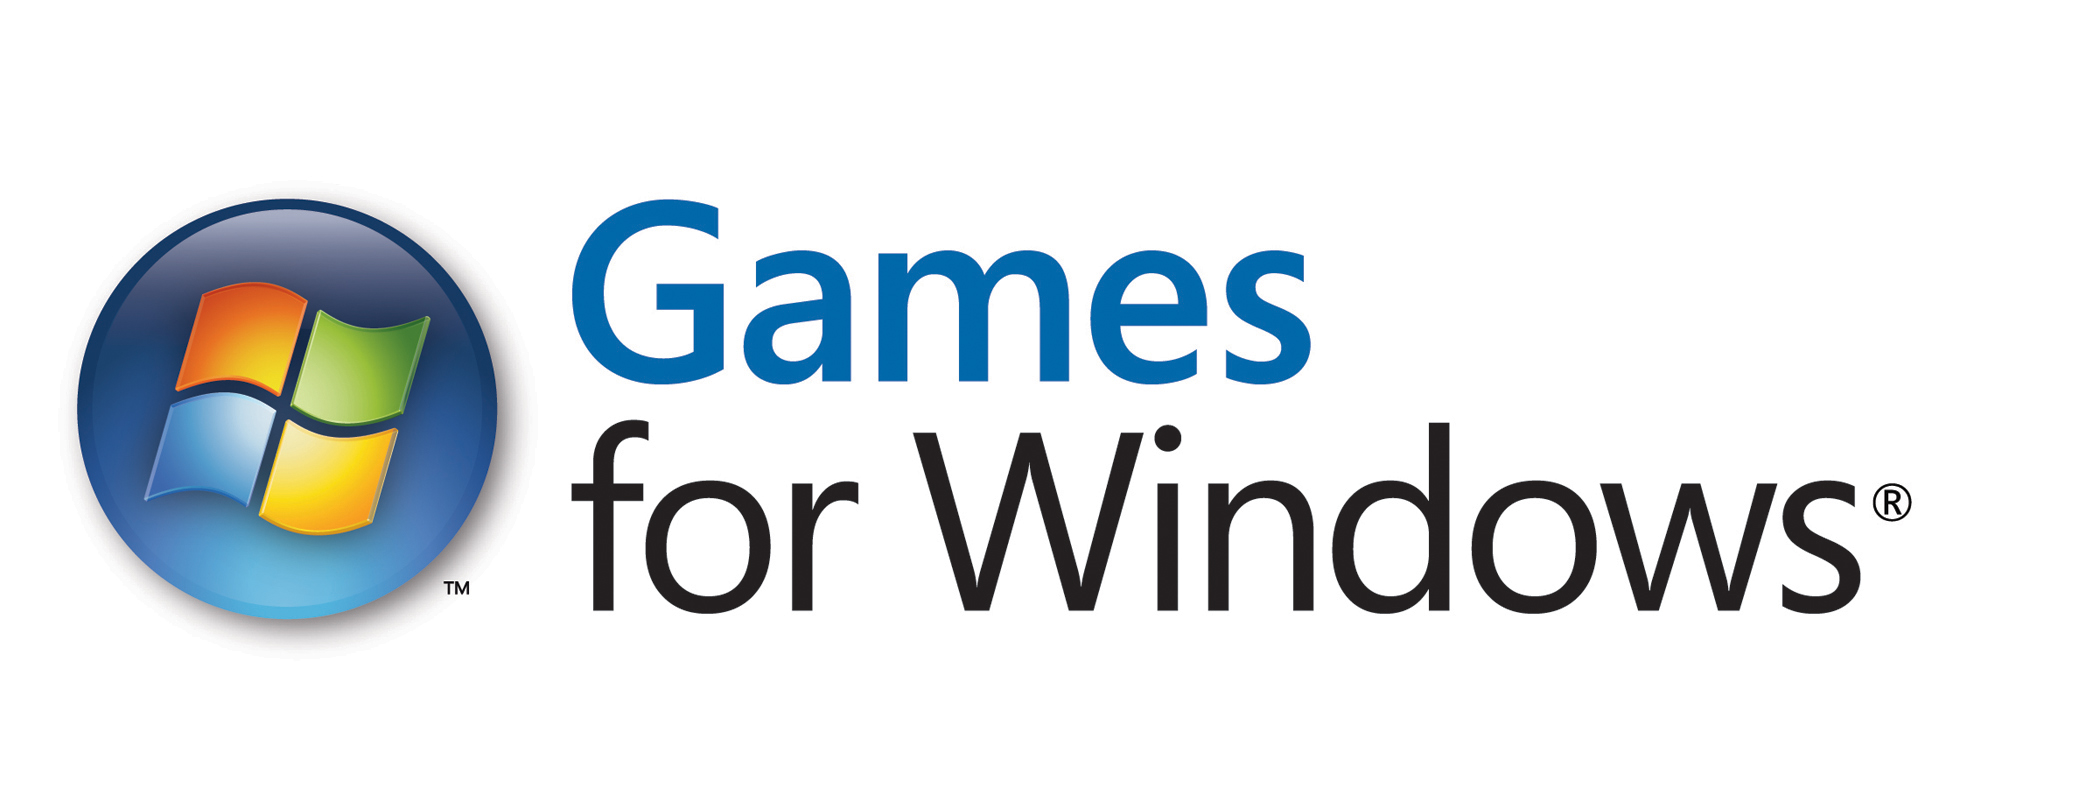 Games for windows